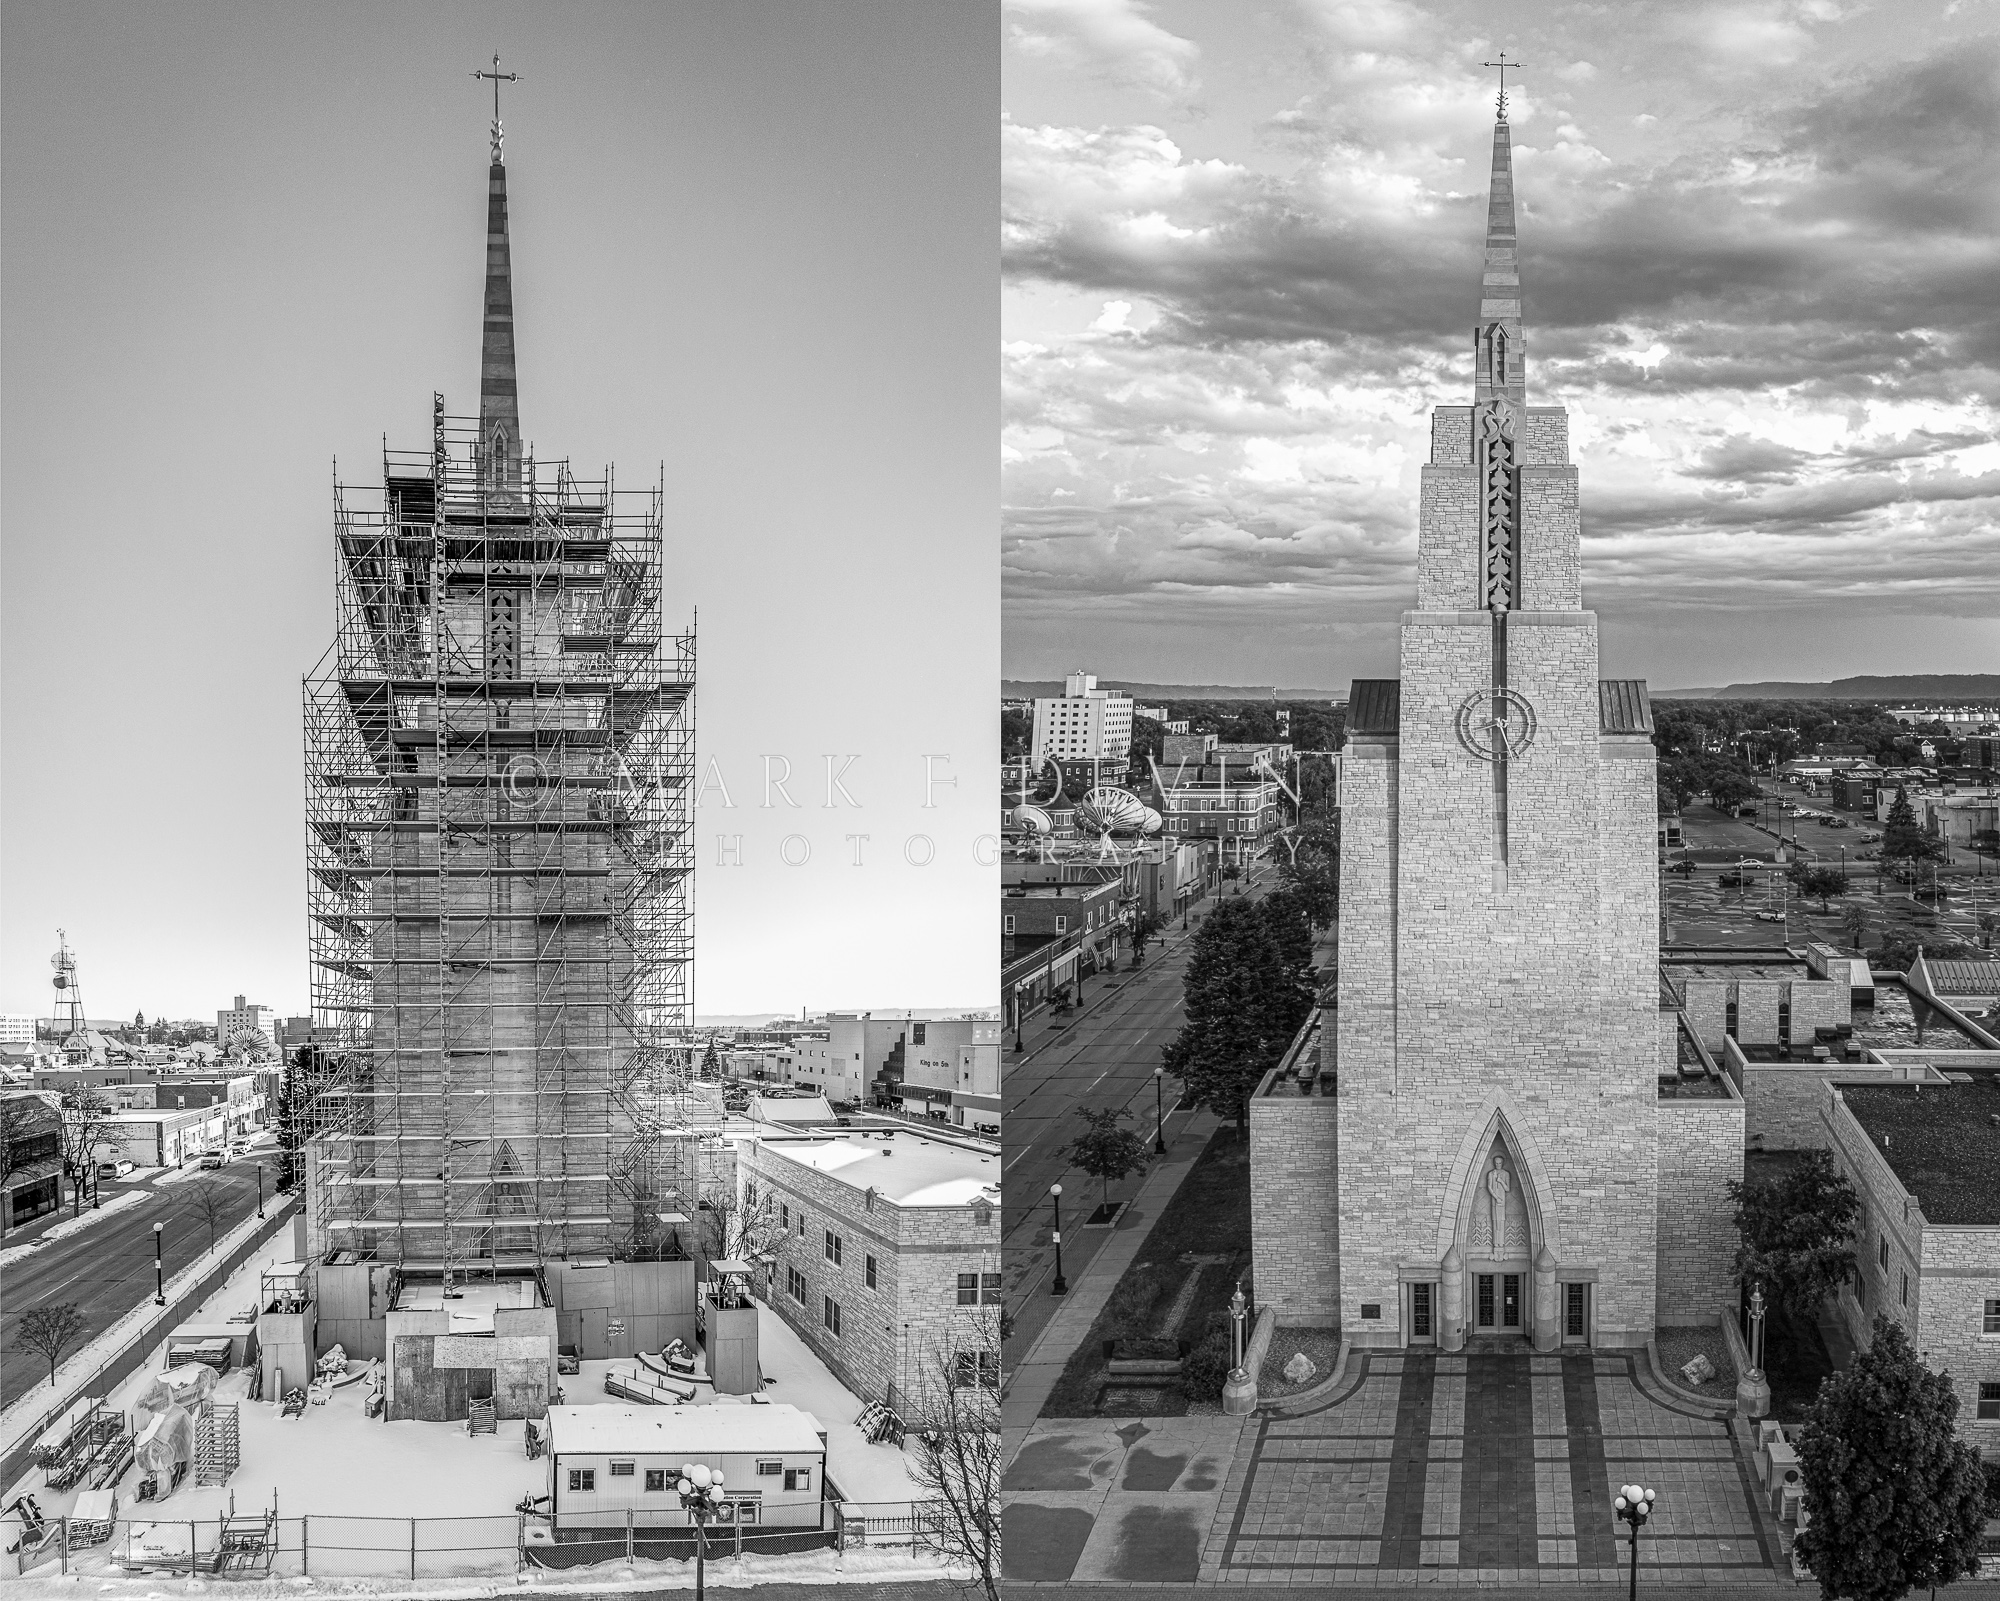 Saint Joseph the Workman - During and After